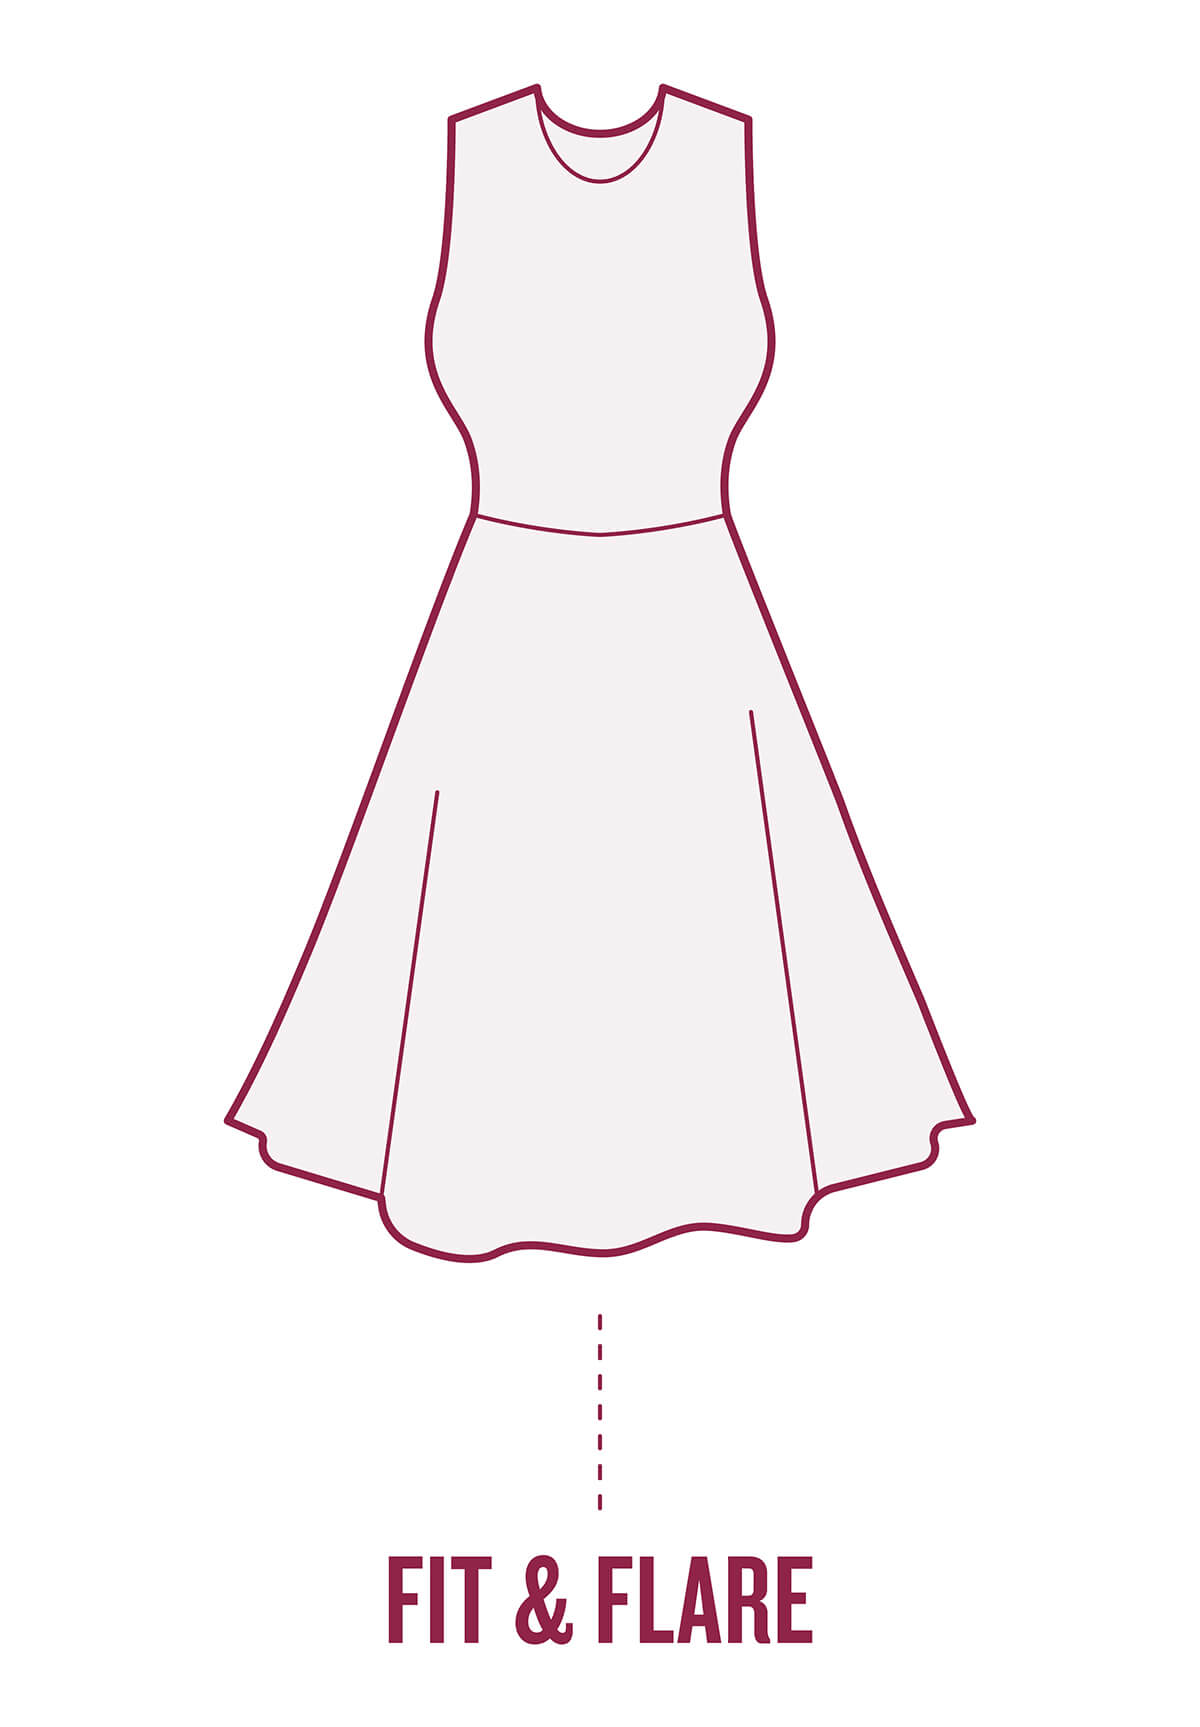 Your Perfect Dress, Find the Dress For Your Body Shape